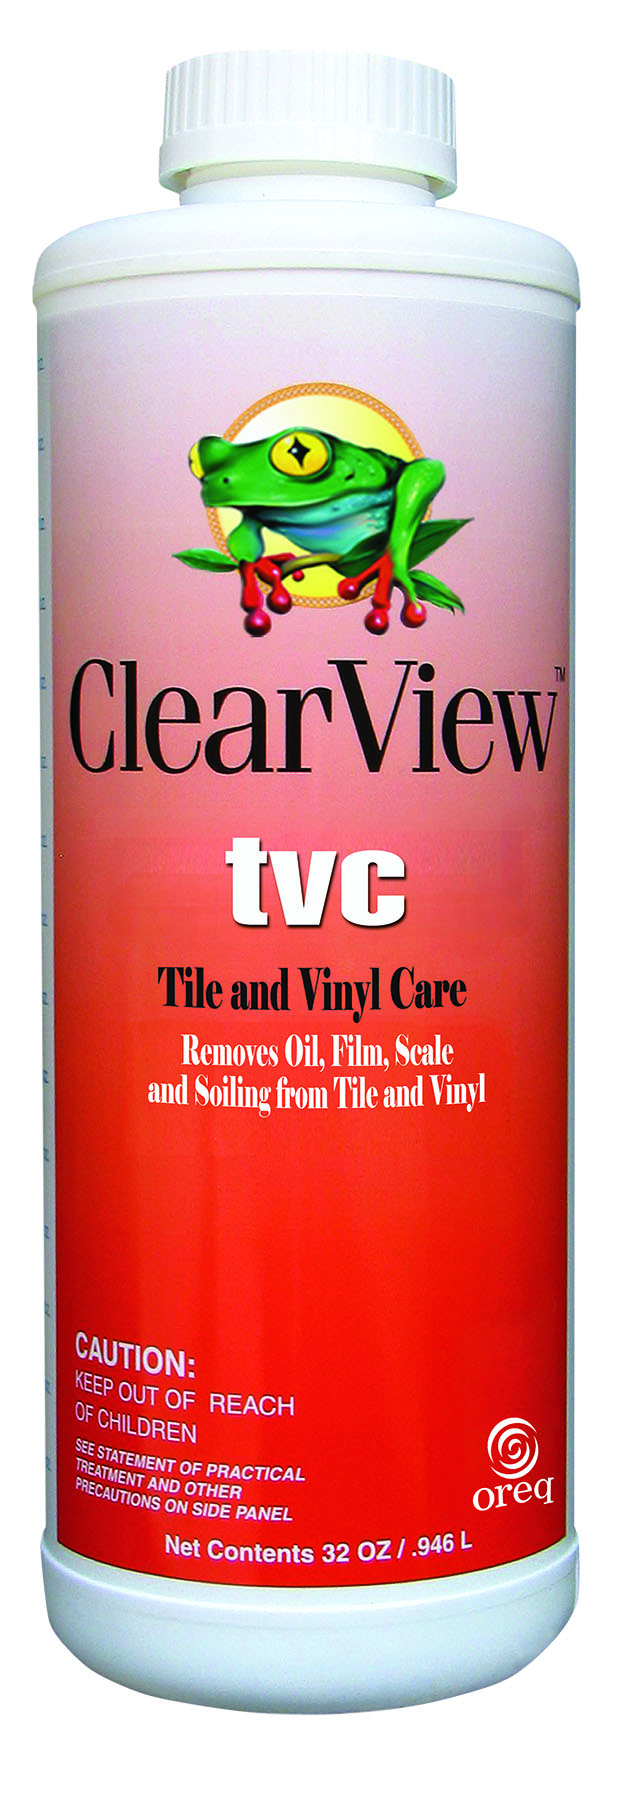 Clearview Tvc 12X1 qt/cs - CLEARVIEW